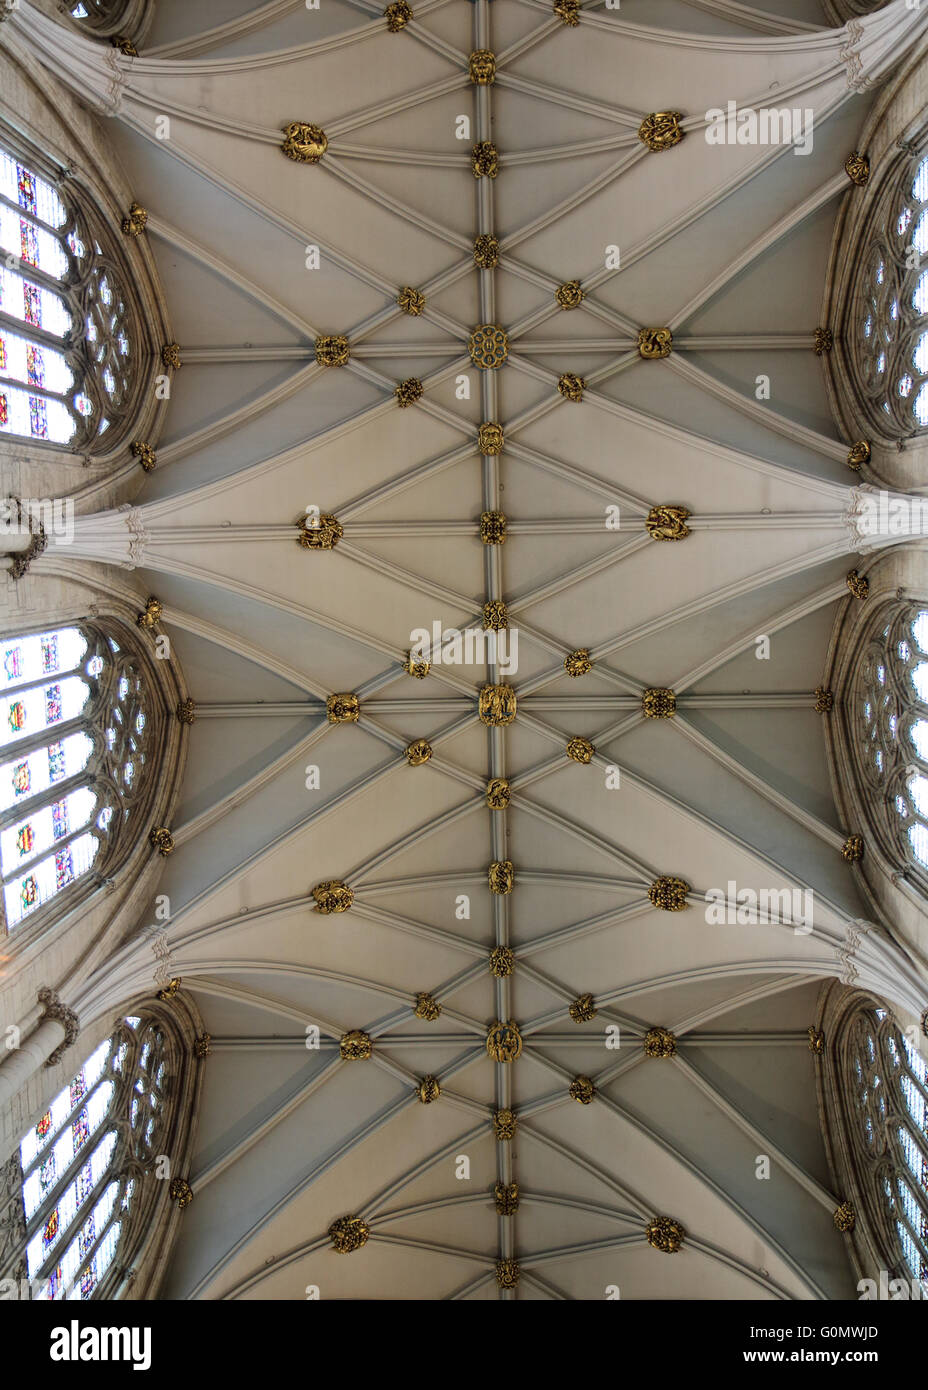 Vaulted ornate ceiling in York minster highly decorated with stained glass windows Stock Photo